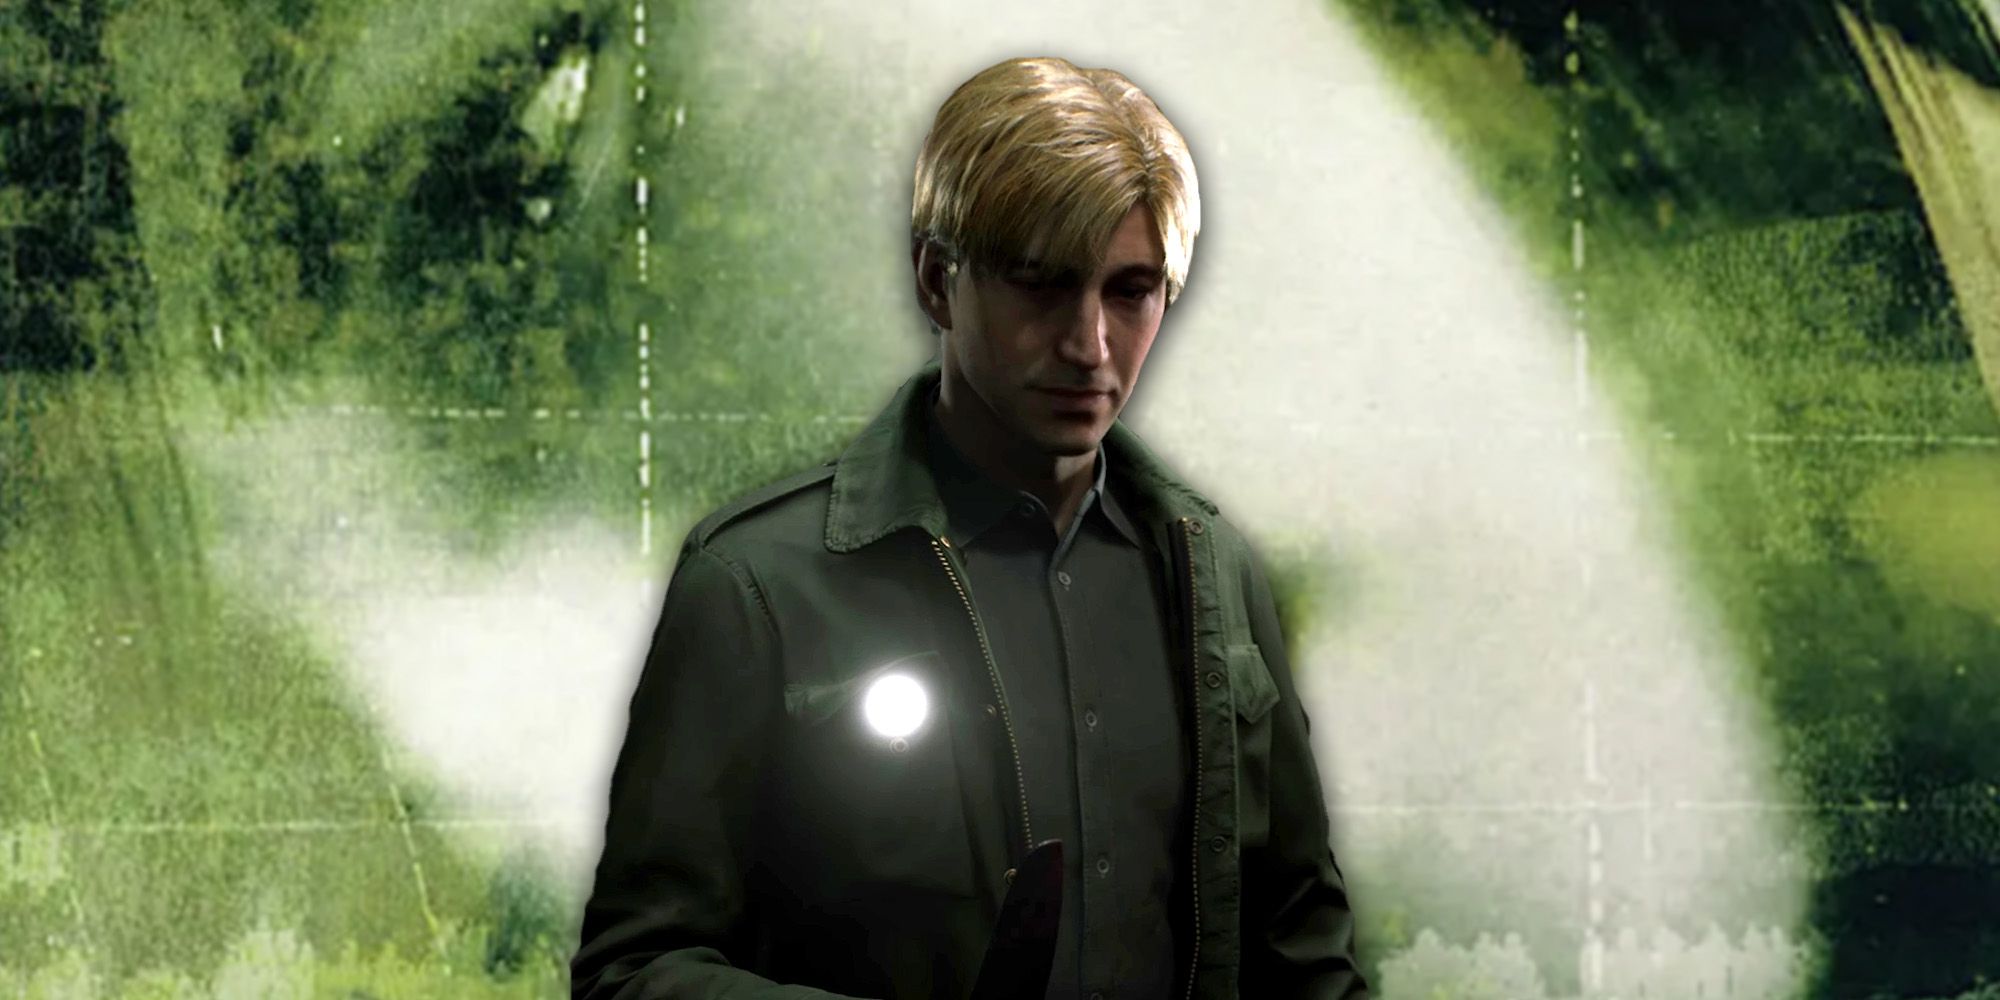 James Sunderland in the Silent Hill 2 Remake in front of the original game's cover.